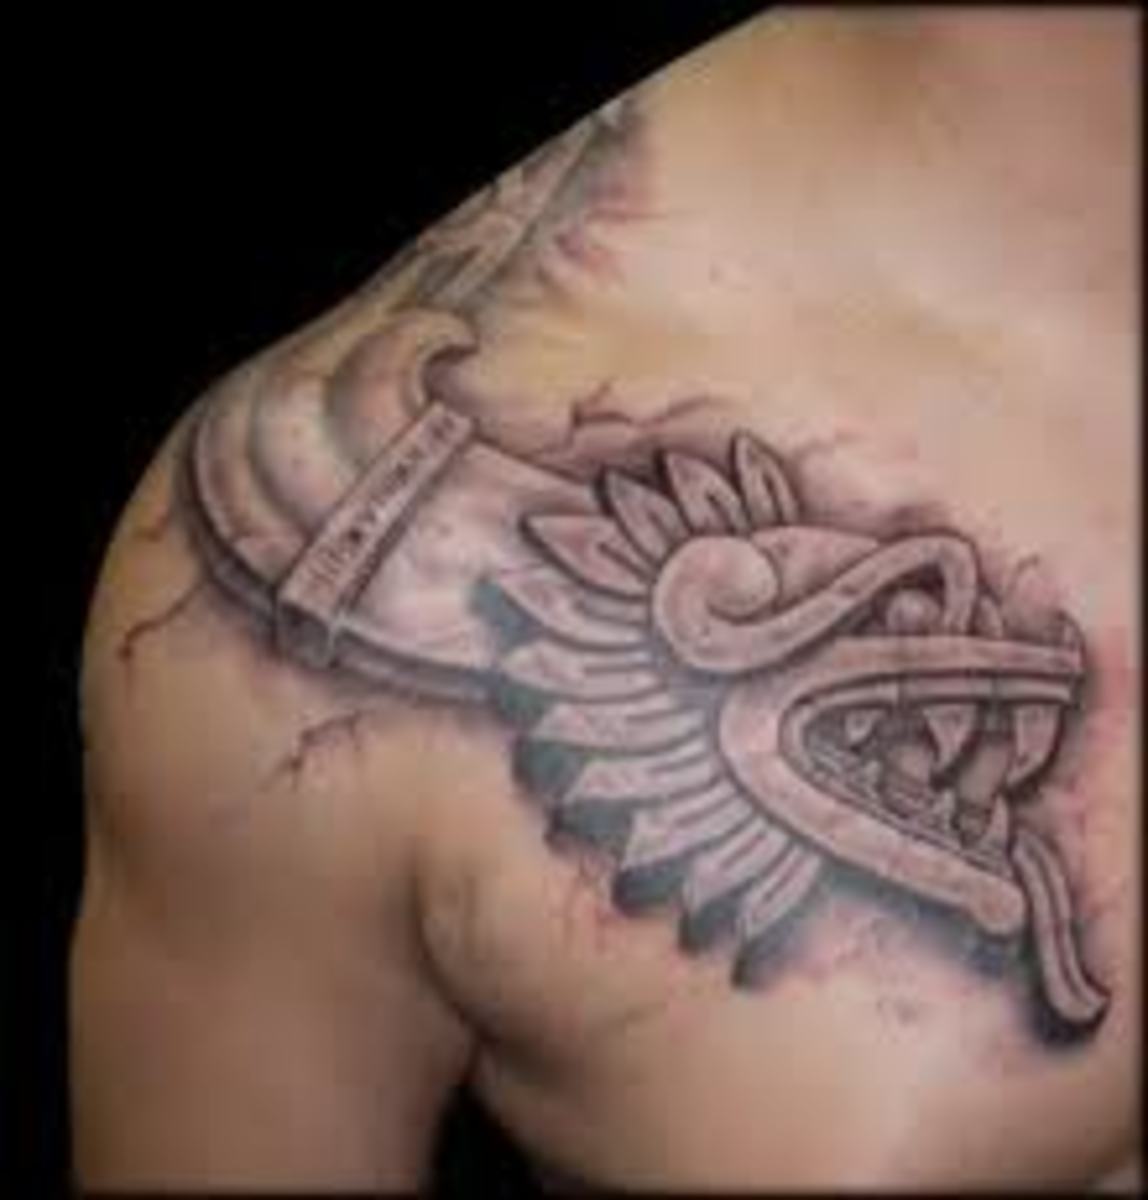 Aztec Tattoo Designs And Meanings-Aztec Tattoo Ideas And Symbolism -  HubPages